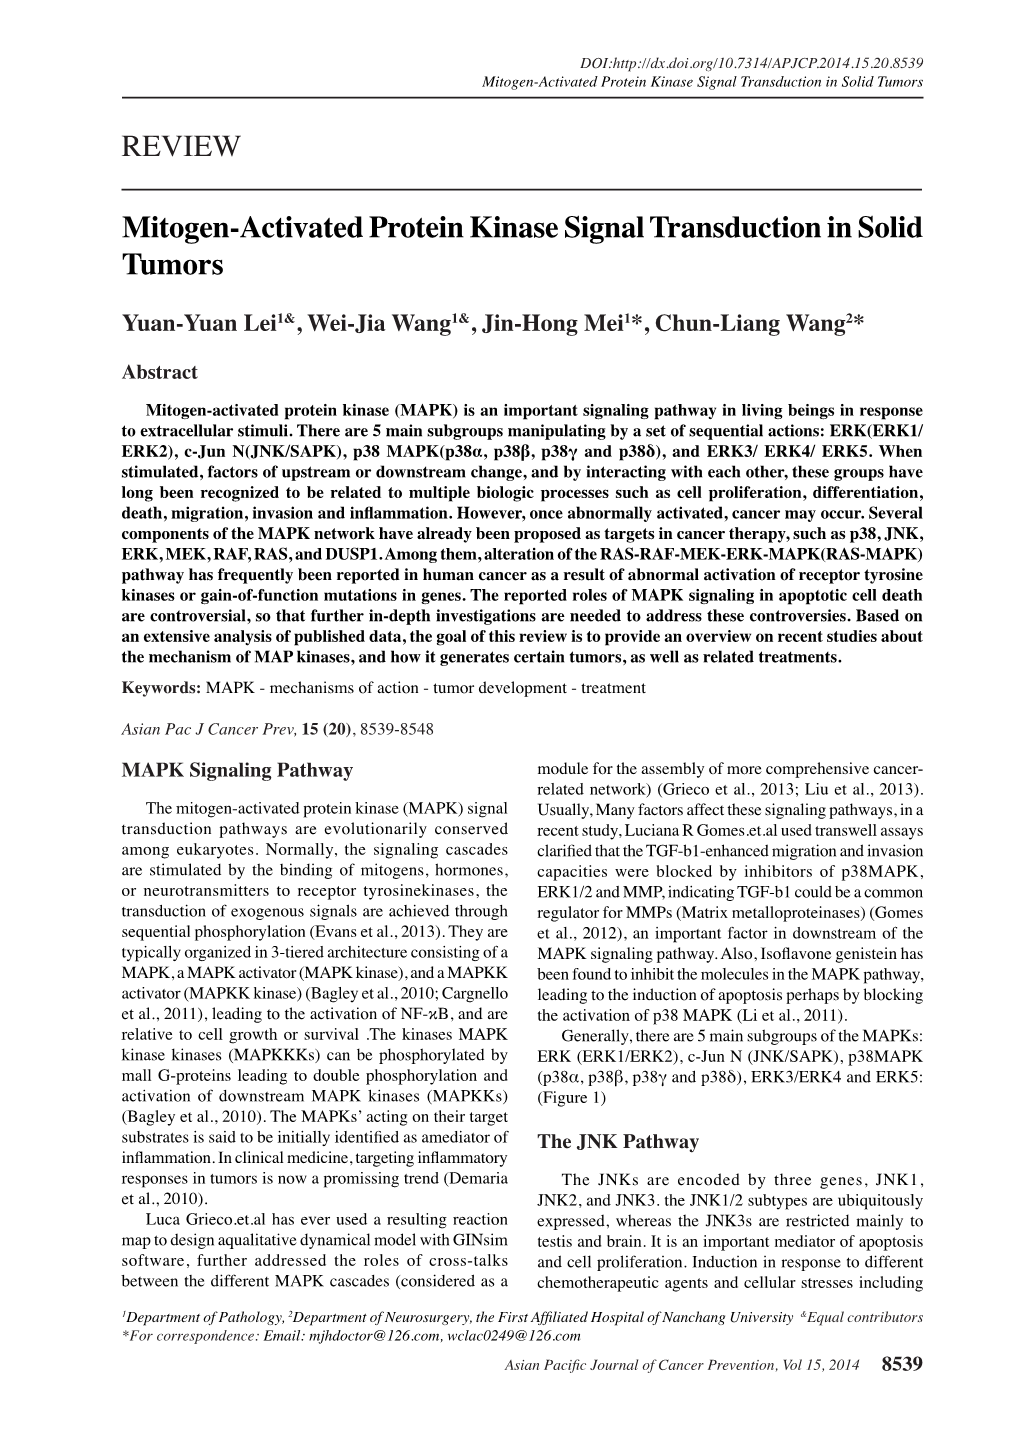 REVIEW Mitogen-Activated Protein Kinase Signal Transduction in Solid